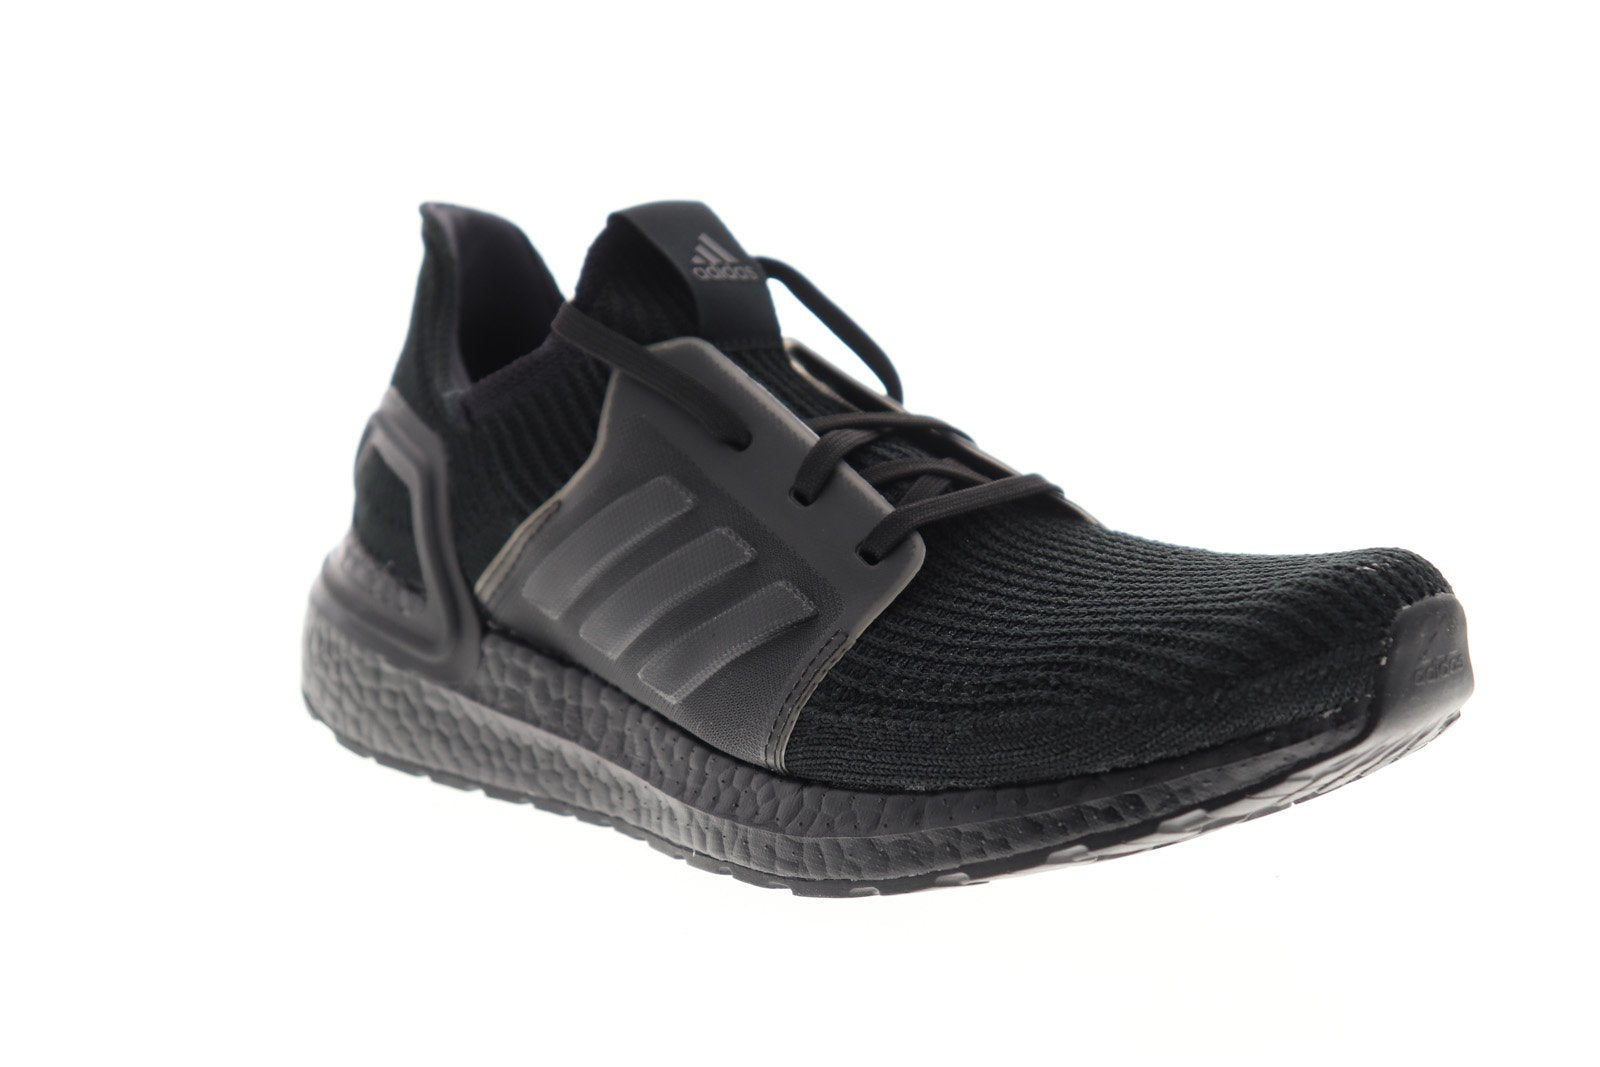 Adidas Ultraboost 19 G27508 Mens Black Canvas Lace Up Athletic Running ...